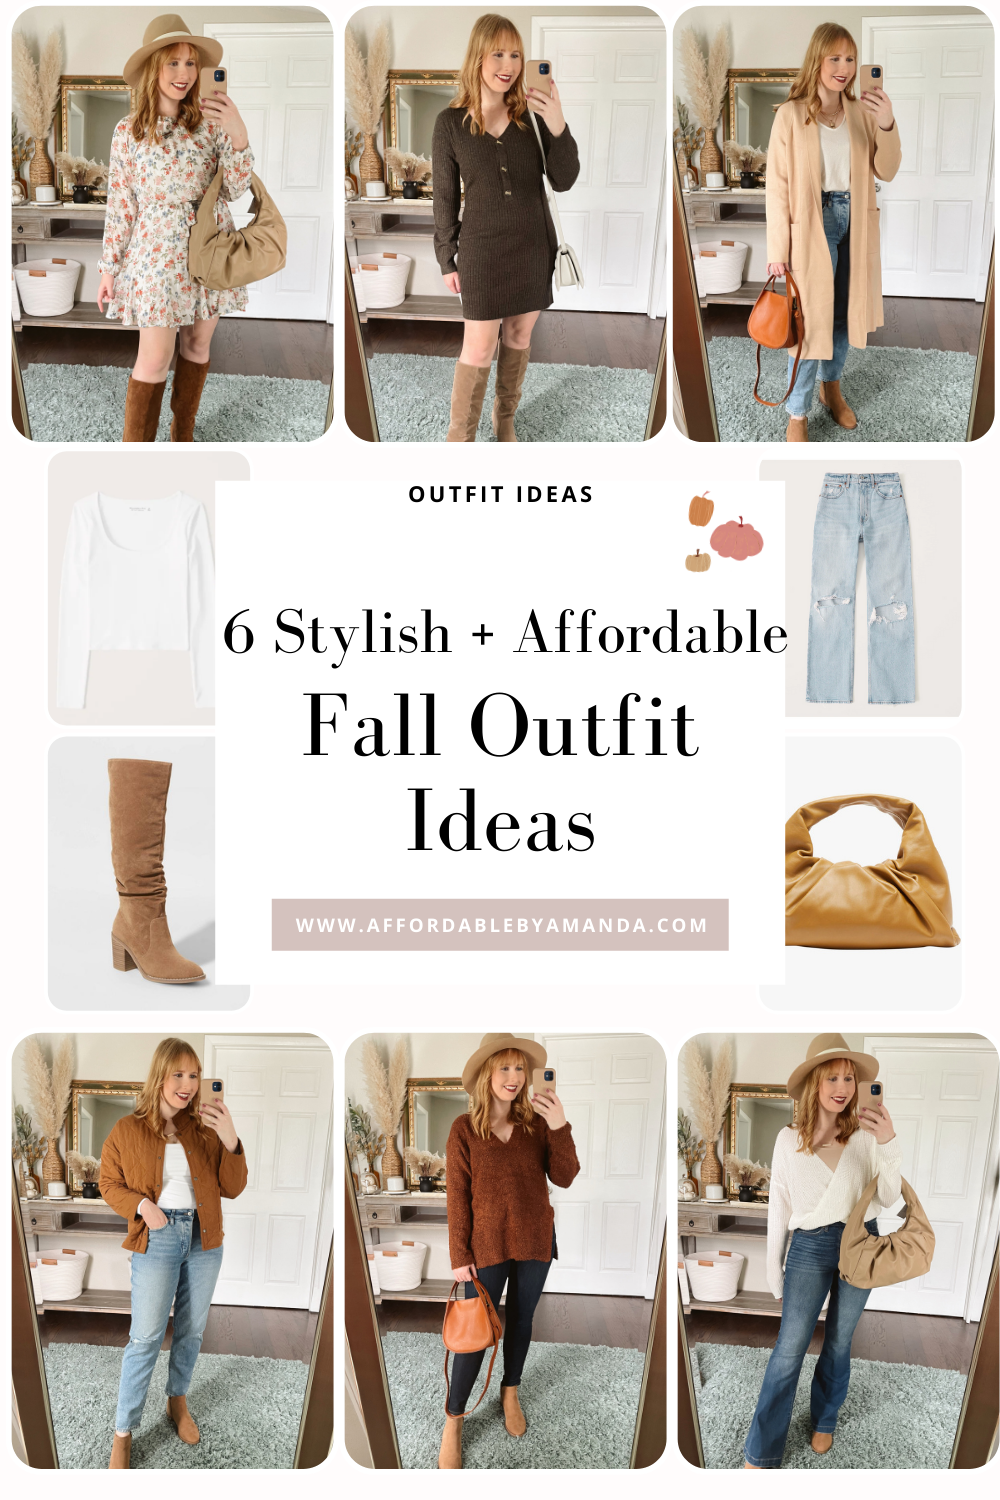 6 Stylish and Affordable Fall Outfit Ideas | Fall & Autumn Outfit Inspiration | Affordable by Amanda